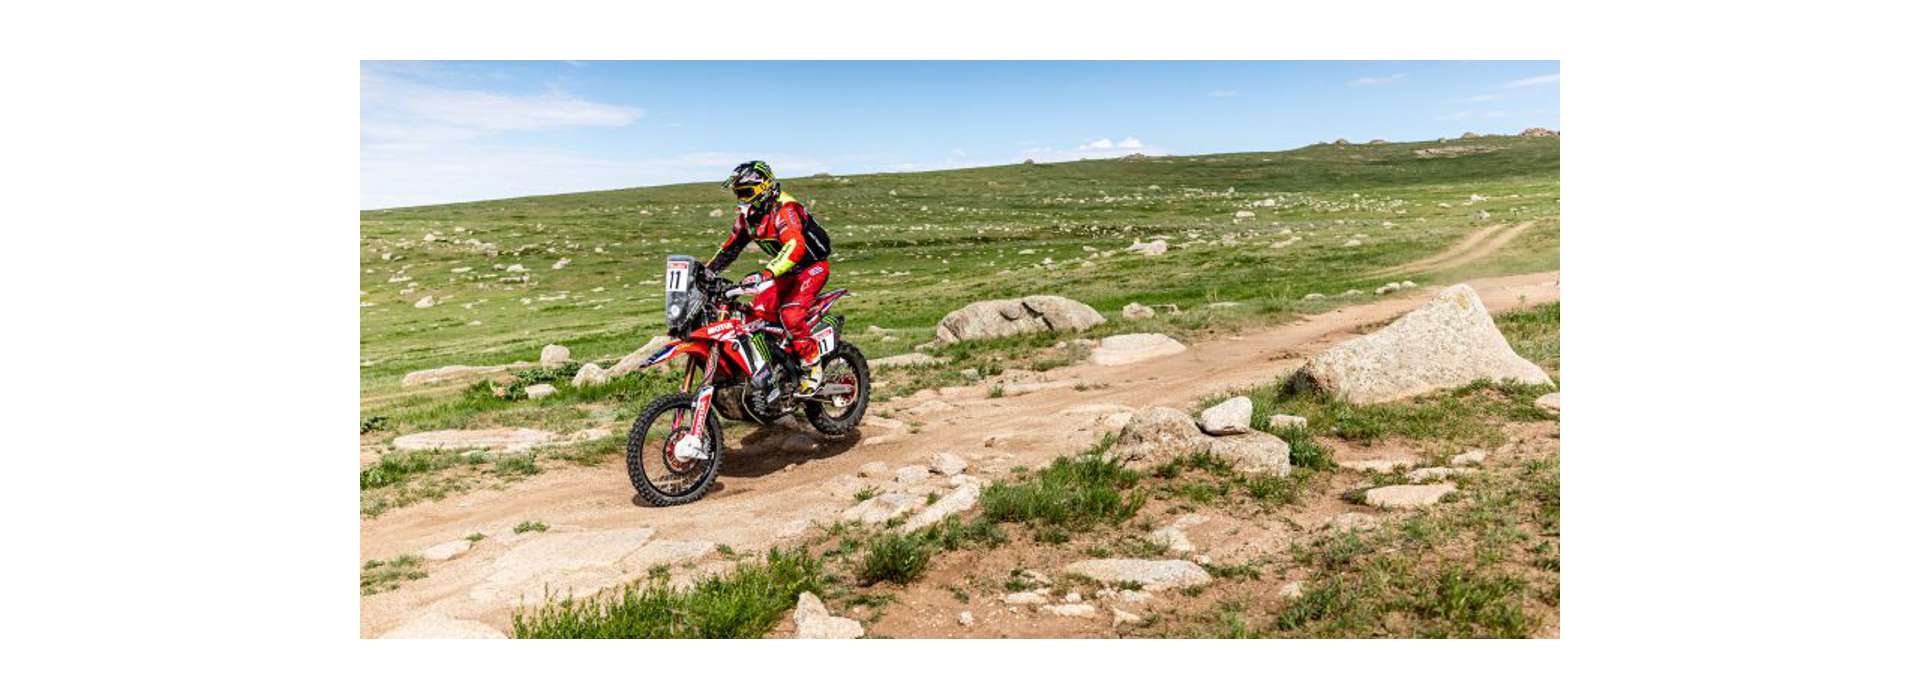 Silk Way Rally 2019: Kevin Benavides pulls back as the marathon stage concludes